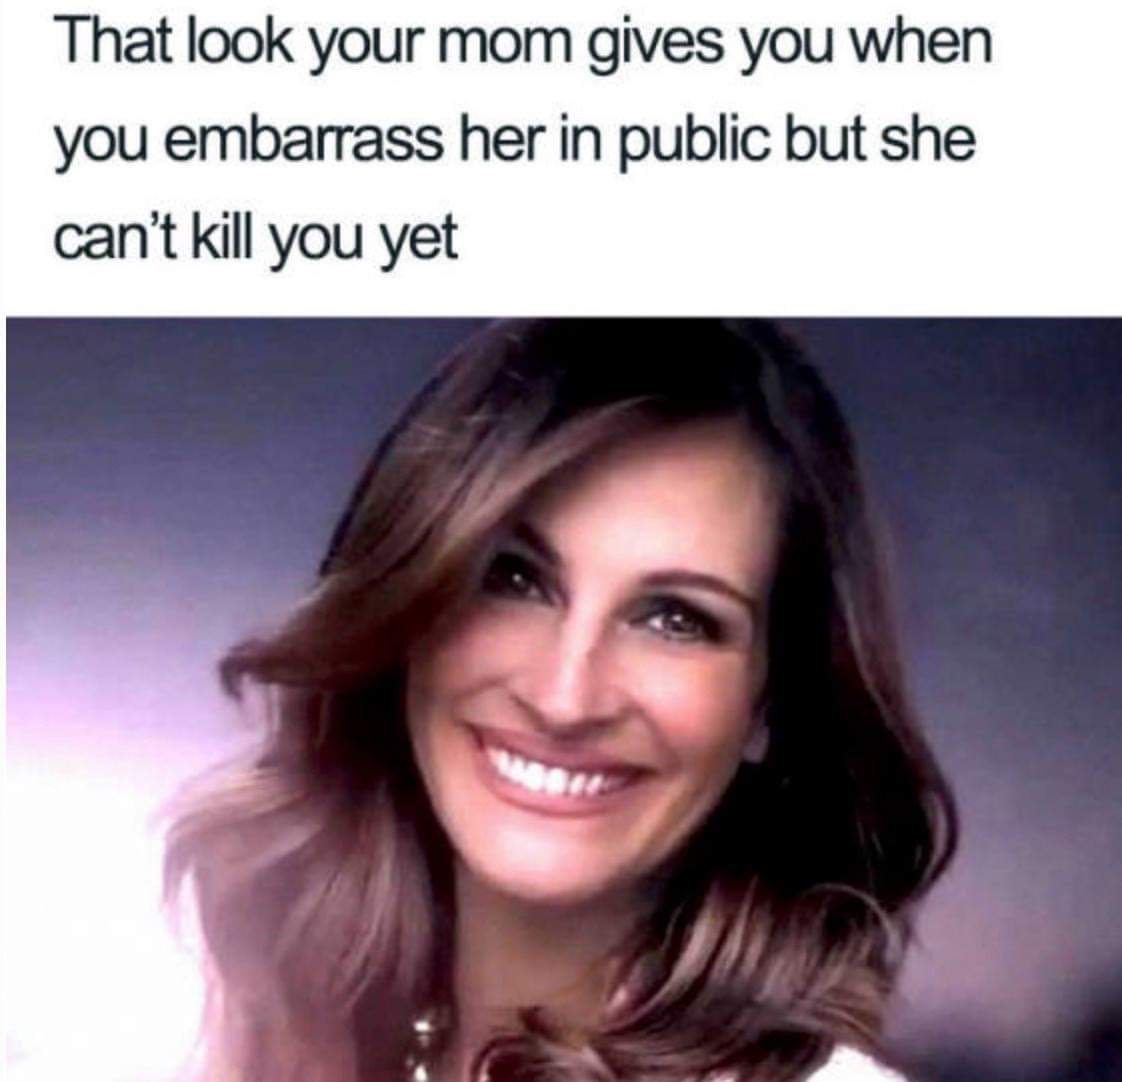 funny mom memes - That look your mom gives you when you embarrass her in public but she can't kill you yet